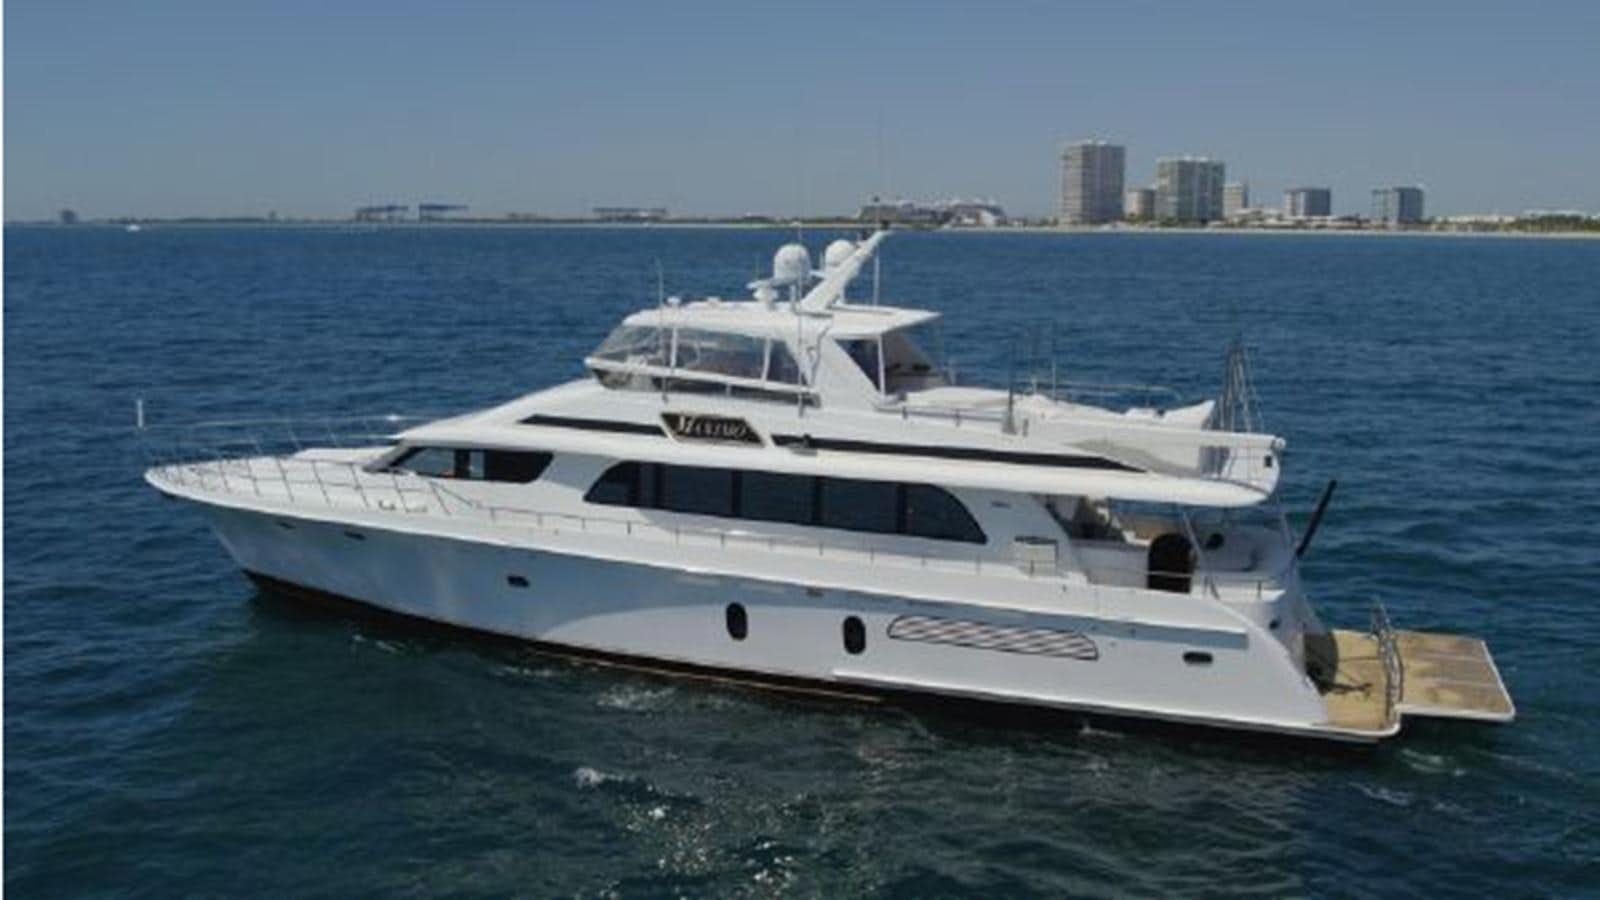 2006 cheoy lee motor
Yacht for Sale